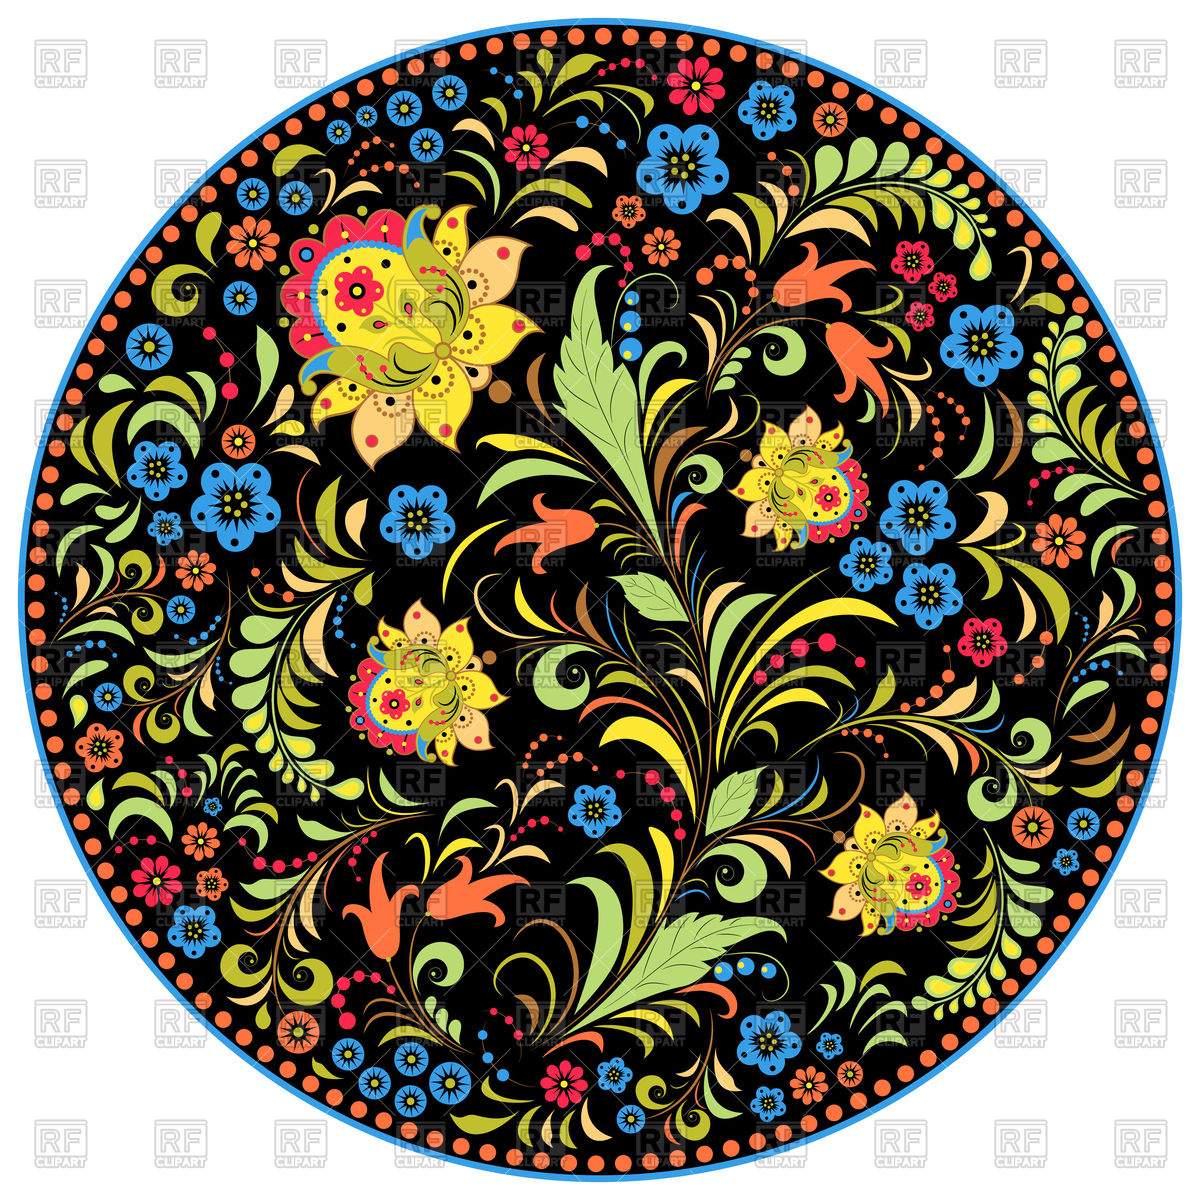 Floral traditional russian pattern Khokhloma Vector Image #110390.